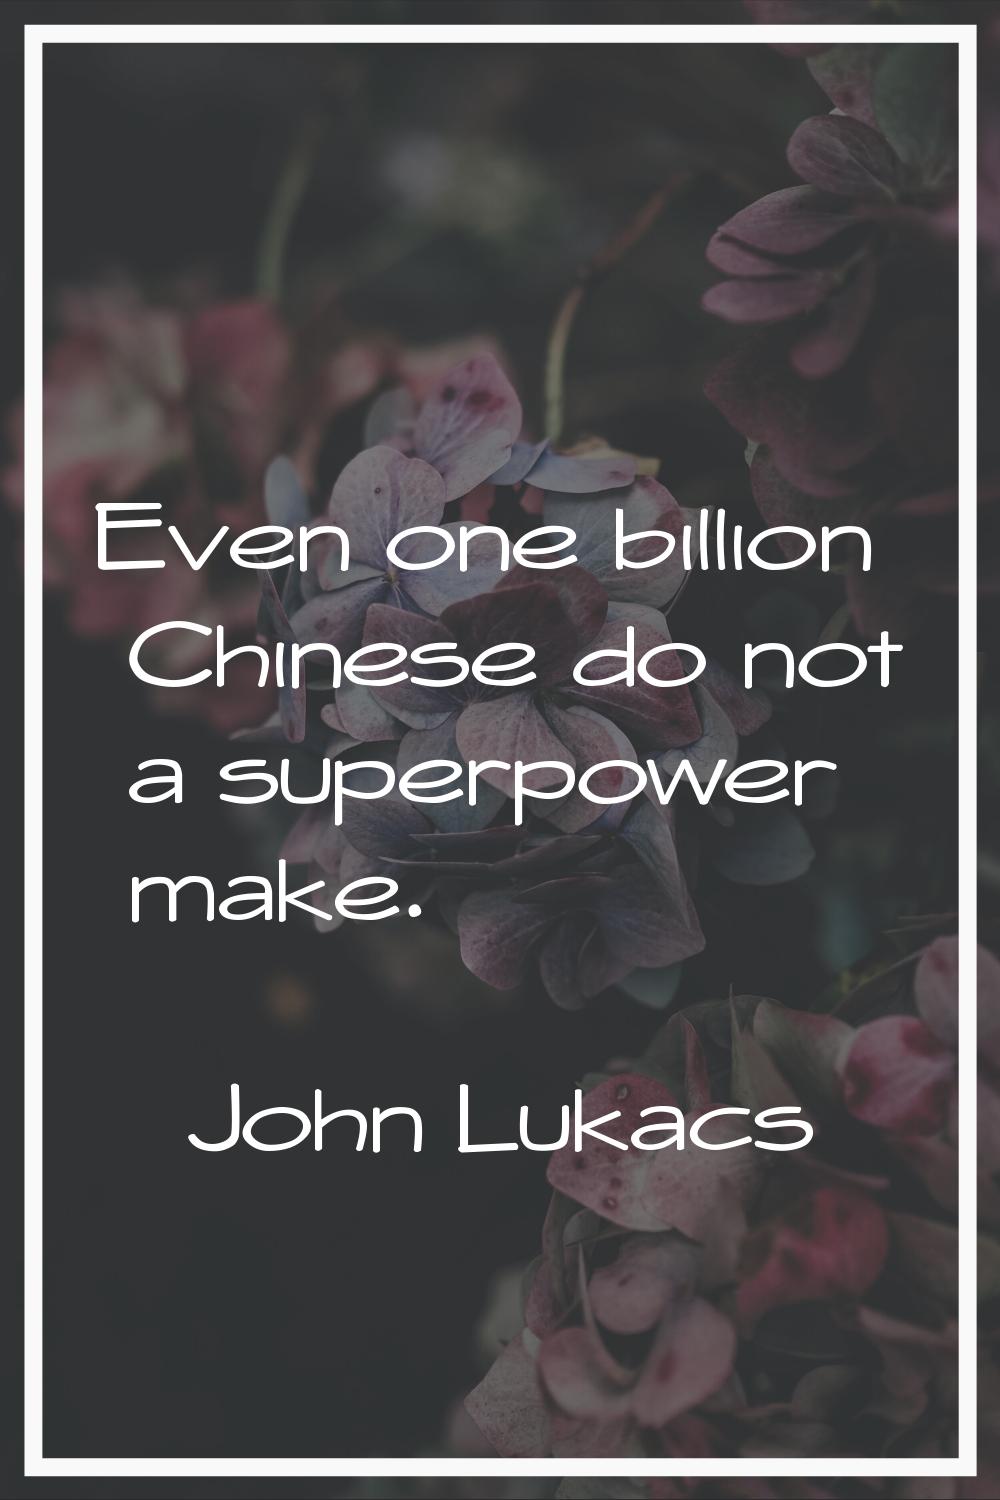 Even one billion Chinese do not a superpower make.